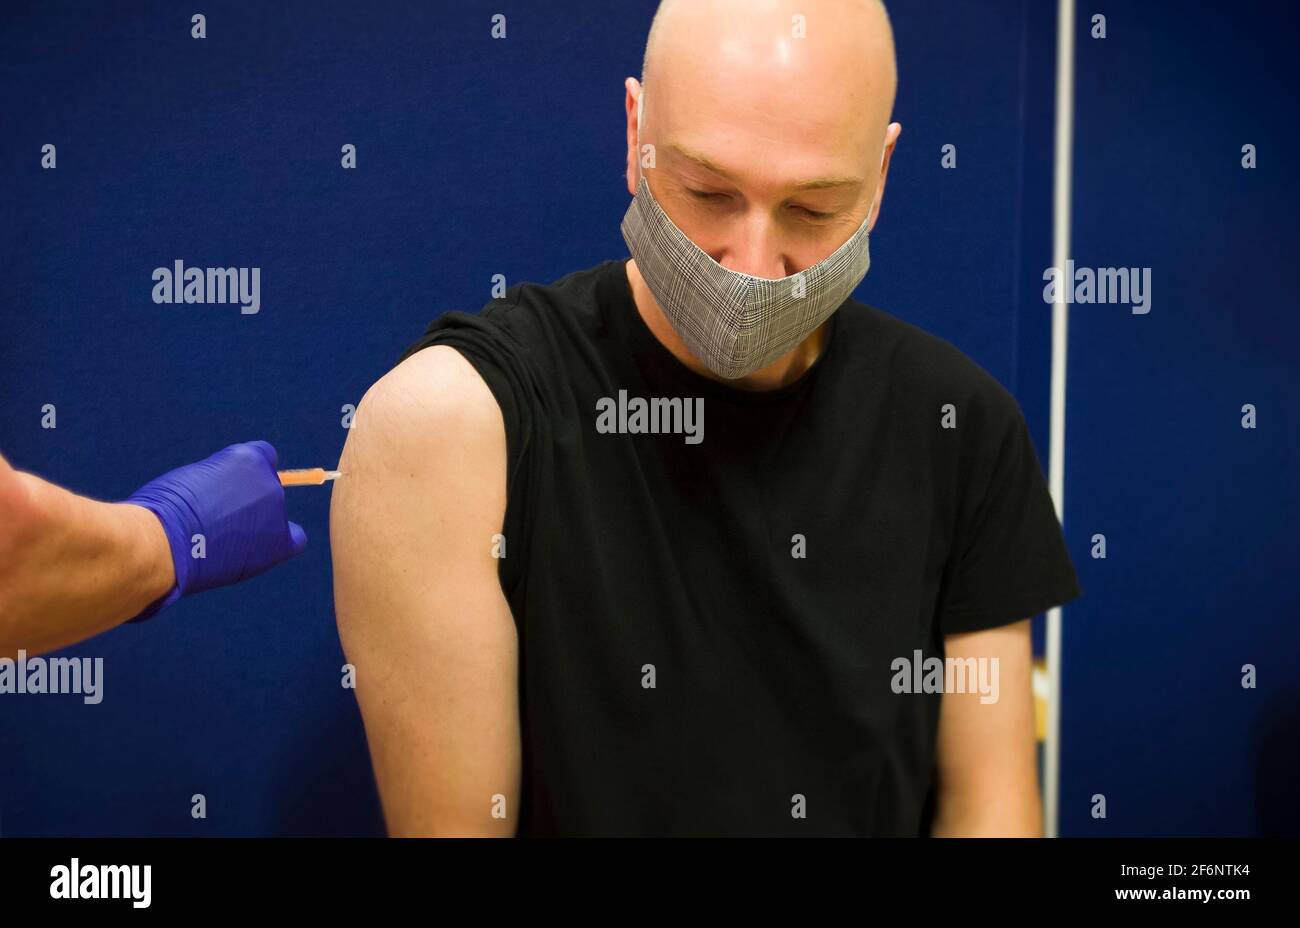 Middle aged white, Caucasian man wearing a face mask, getting a Covid 19 vaccine injection, England, UK Stock Photo